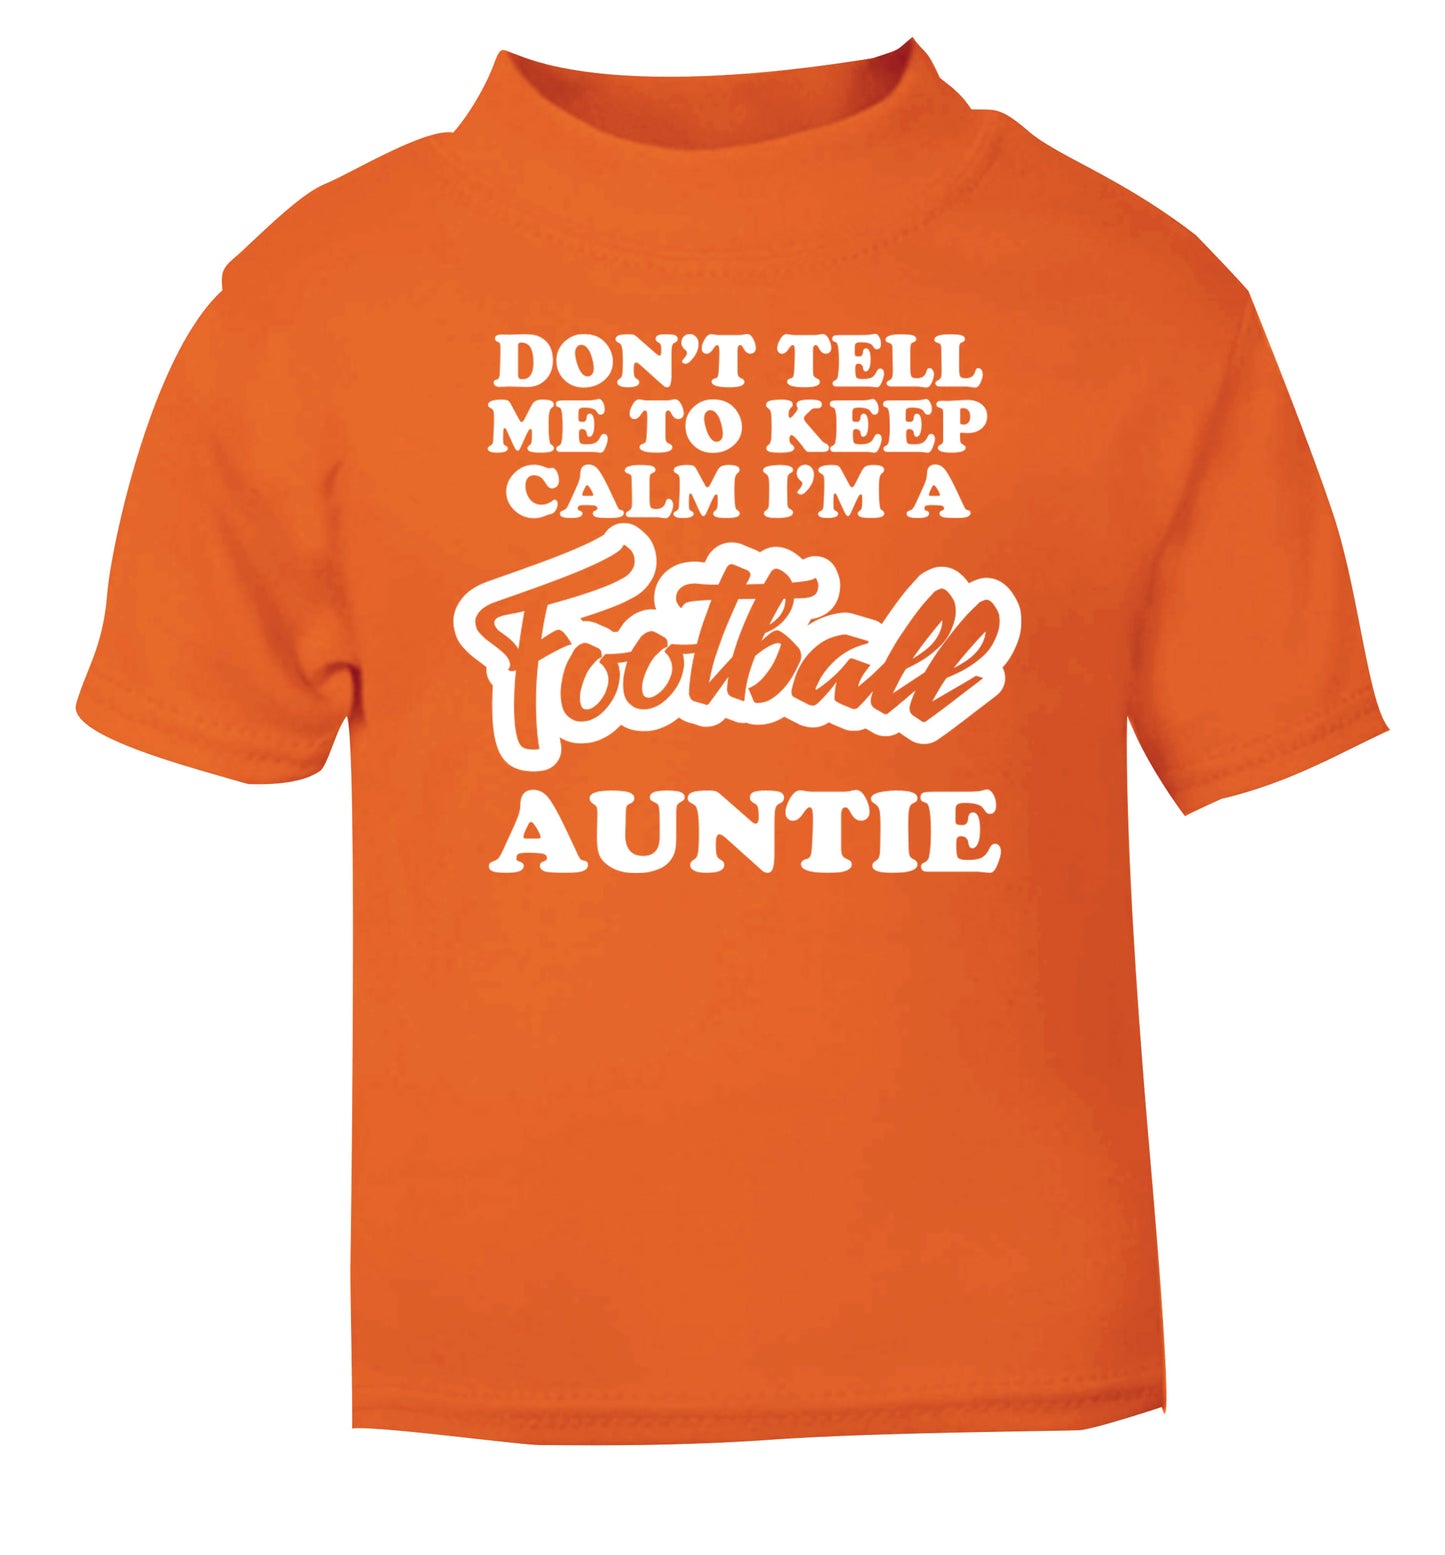 Don't tell me to keep calm I'm a football auntie orange Baby Toddler Tshirt 2 Years